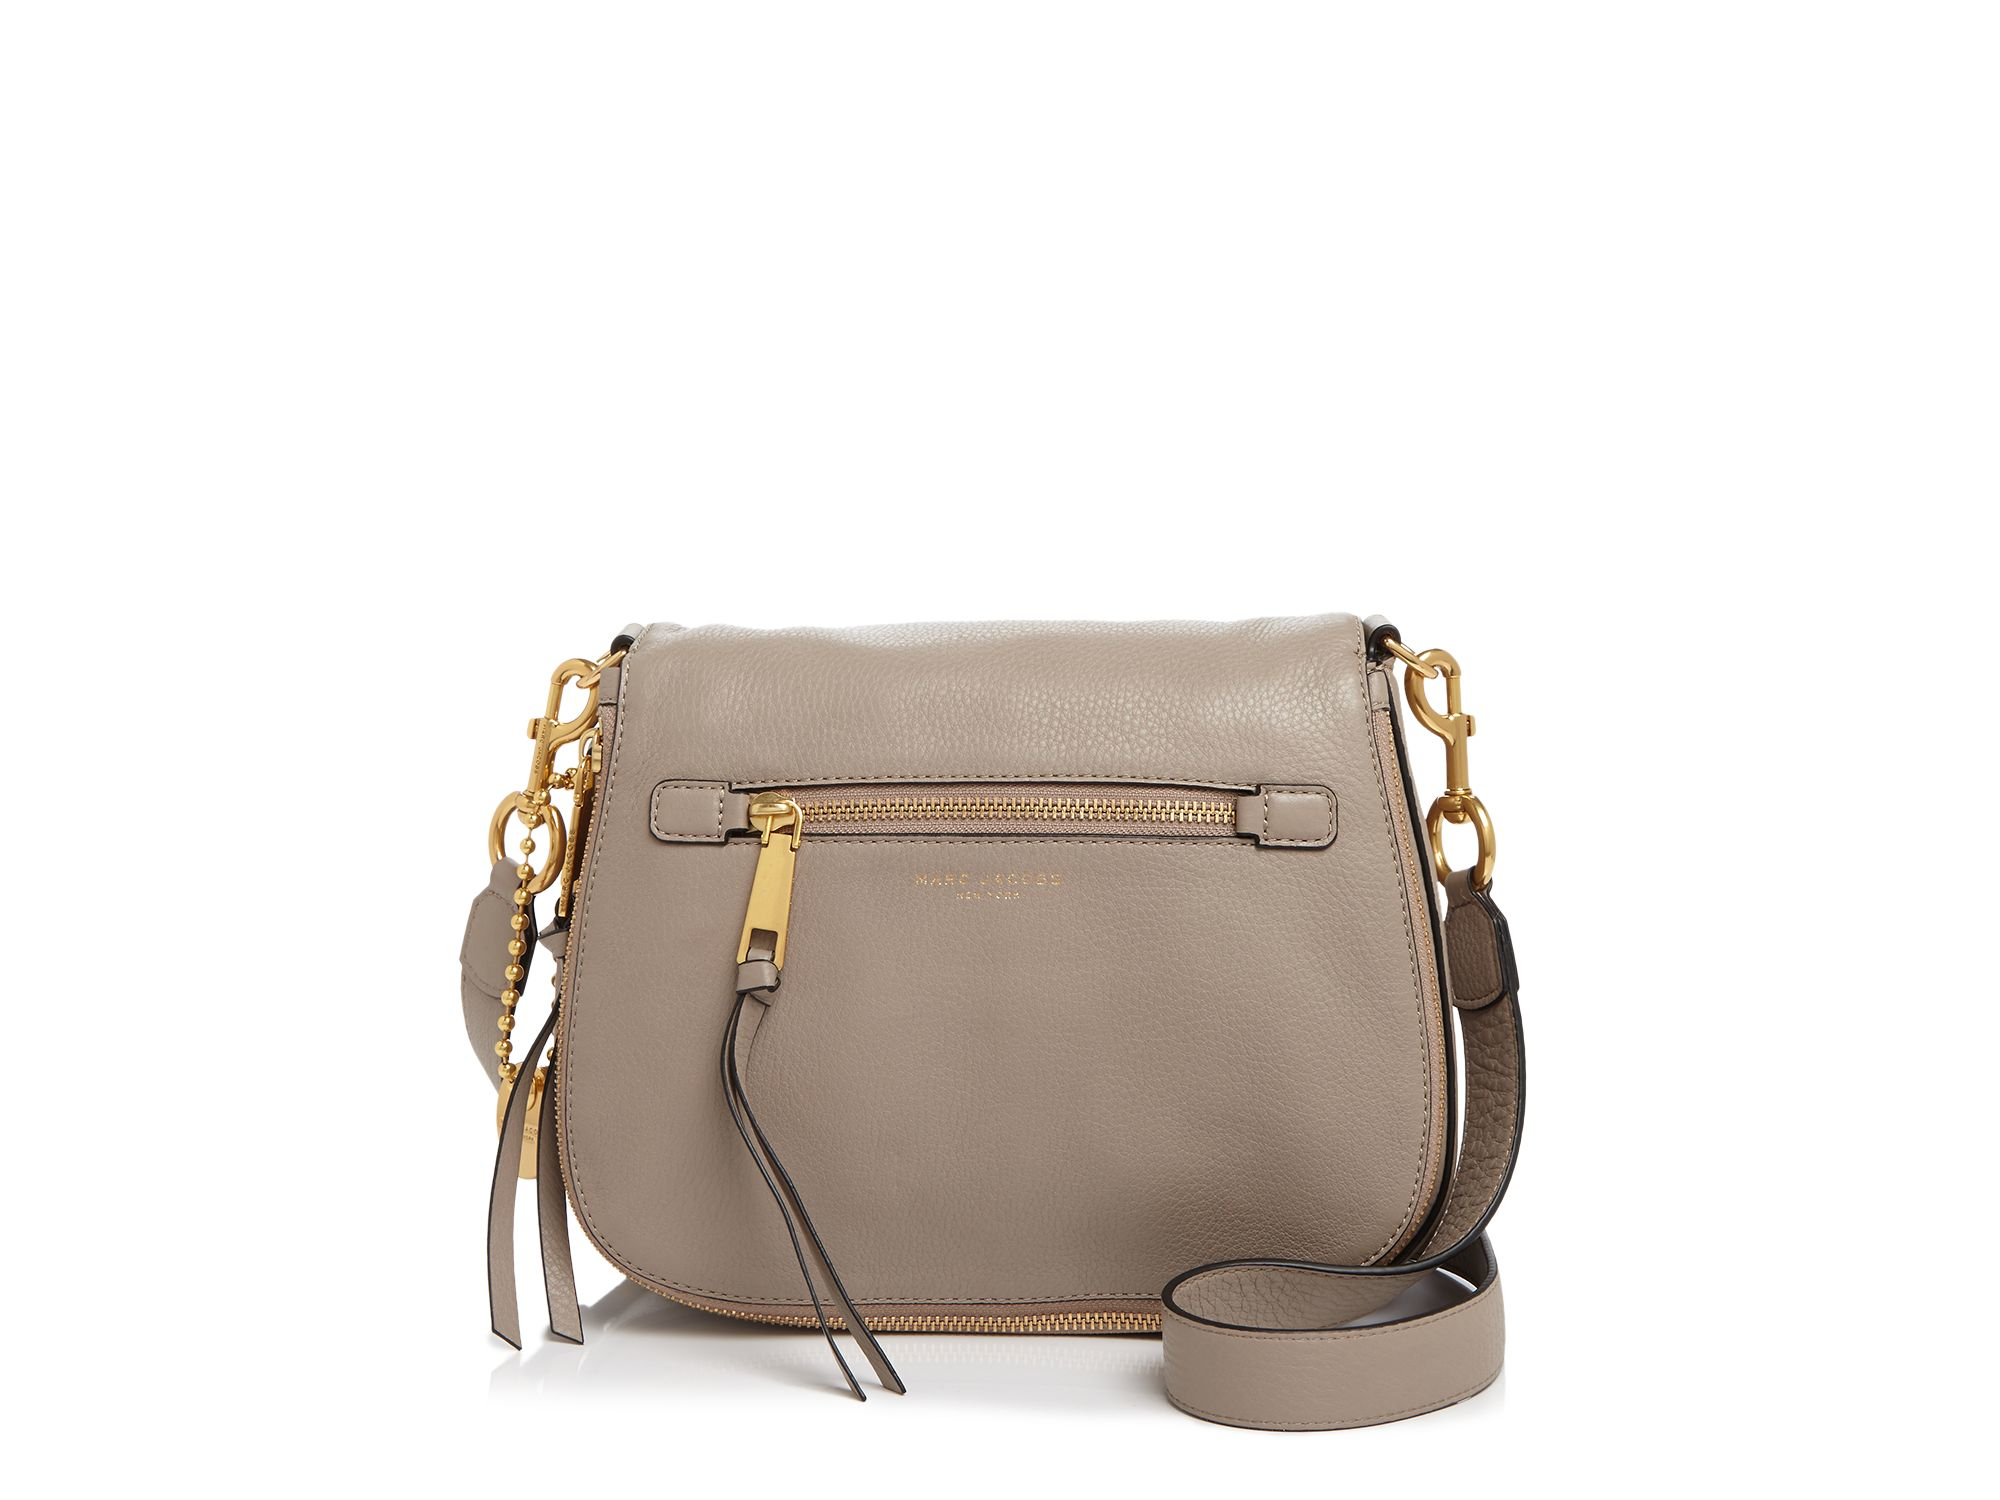 Lyst - Marc Jacobs Recruit Saddle Bag in Gray